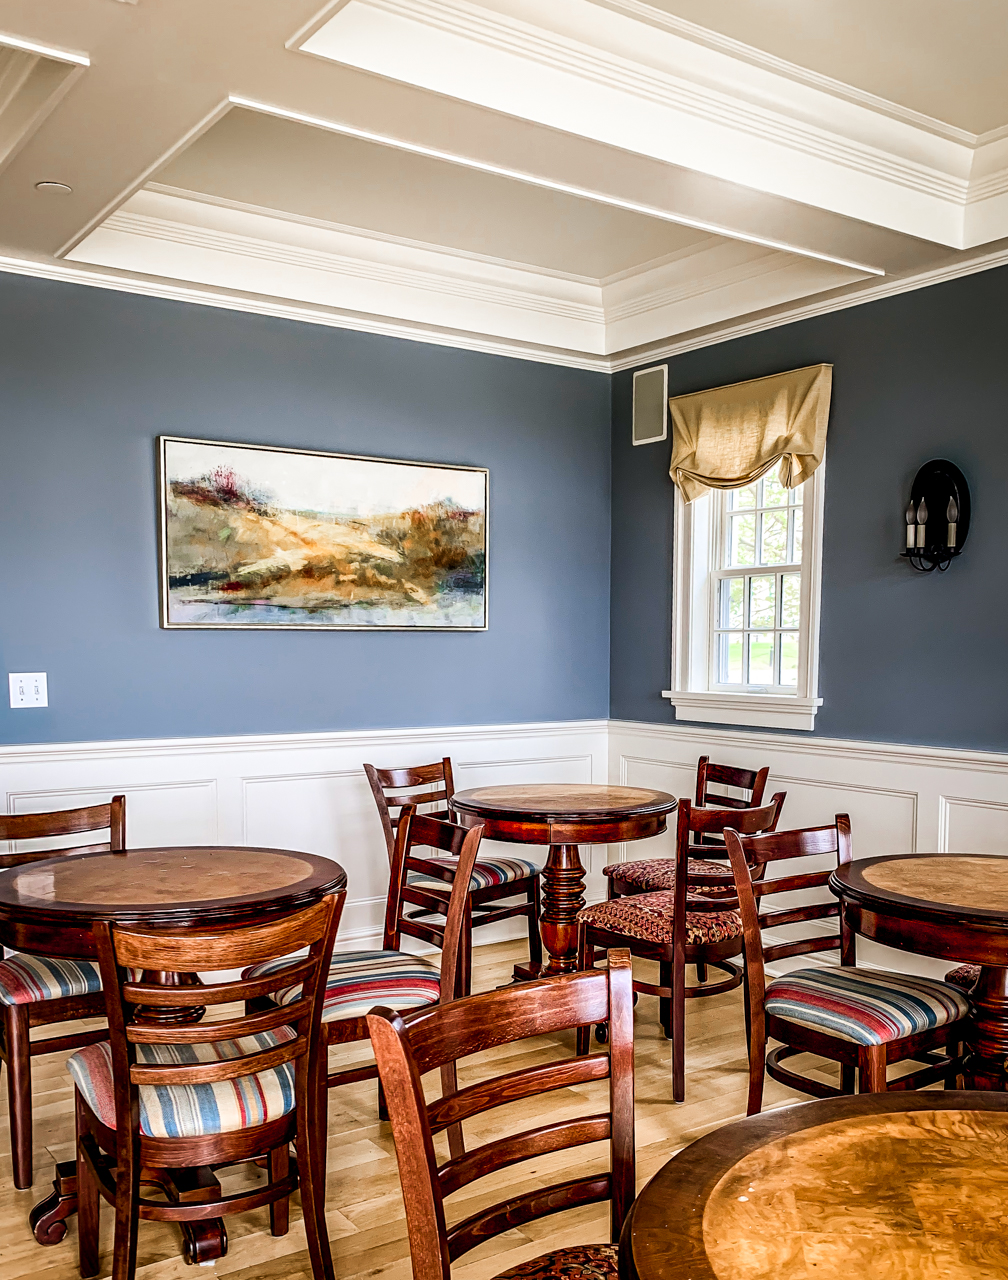 New England Waterfront Getaway: the Inn at Stonington reviewed by top US travel blogger, Shannon Shipman